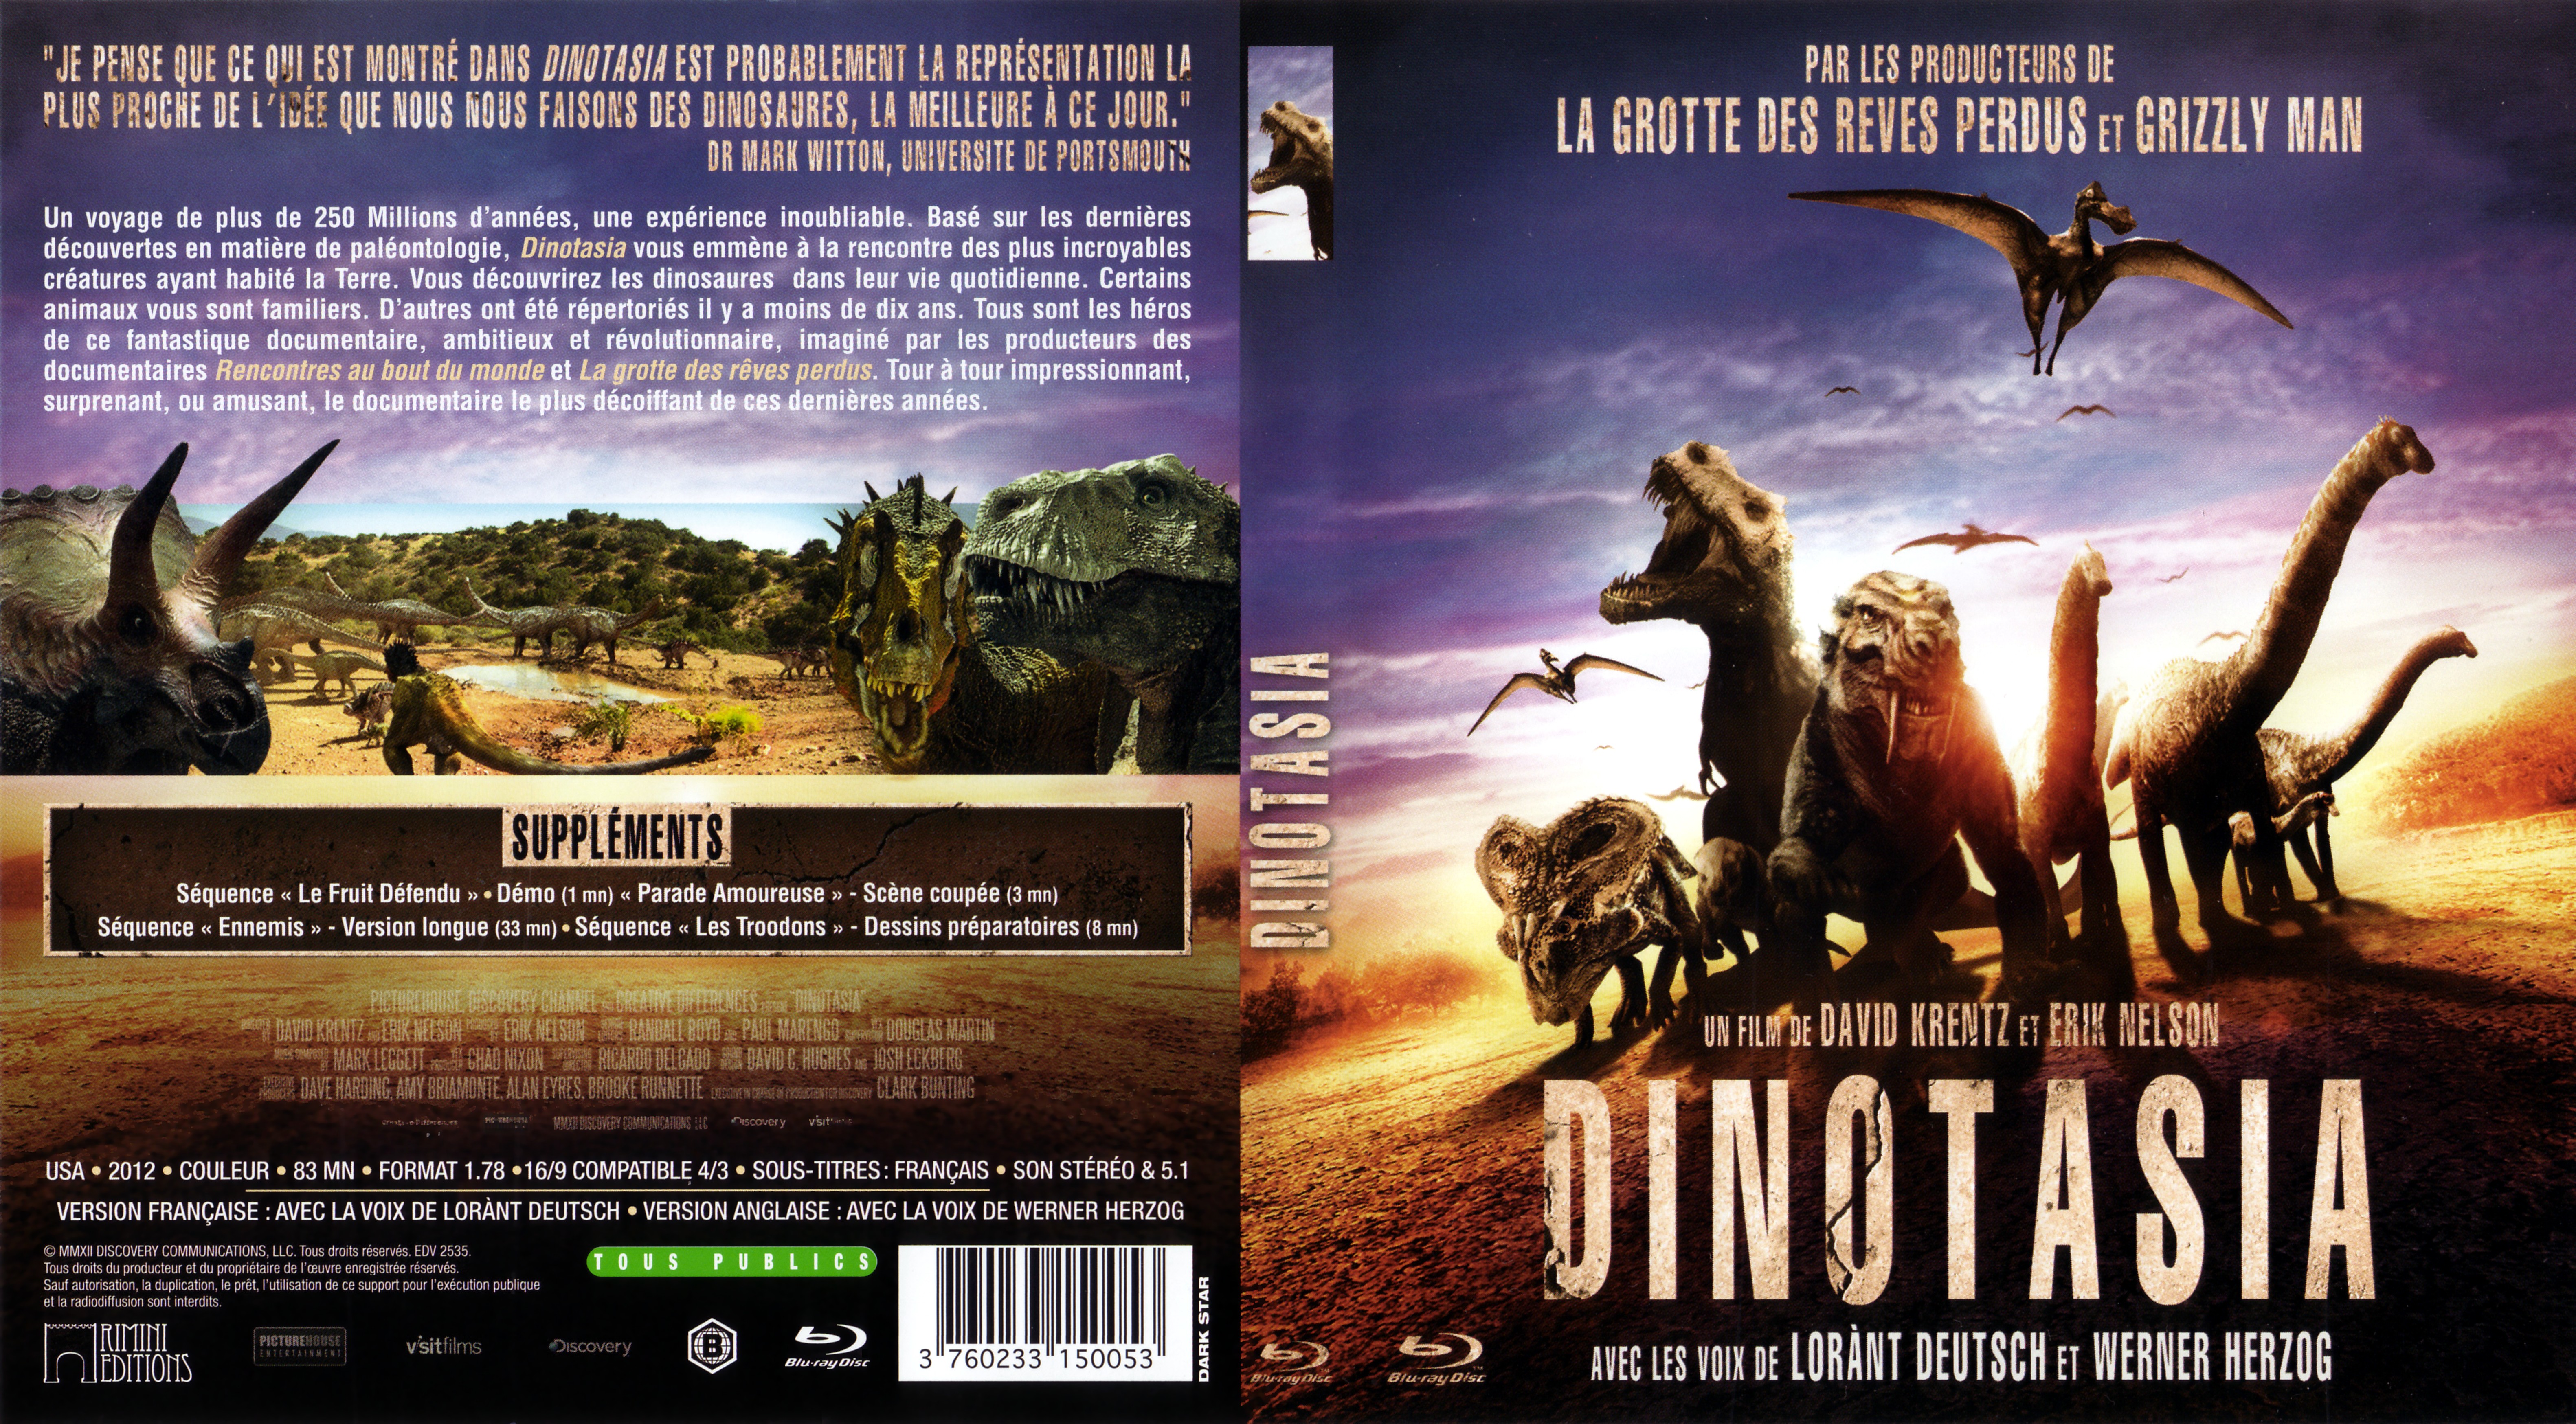 Jaquette DVD Dinotasia (BLU-RAY)